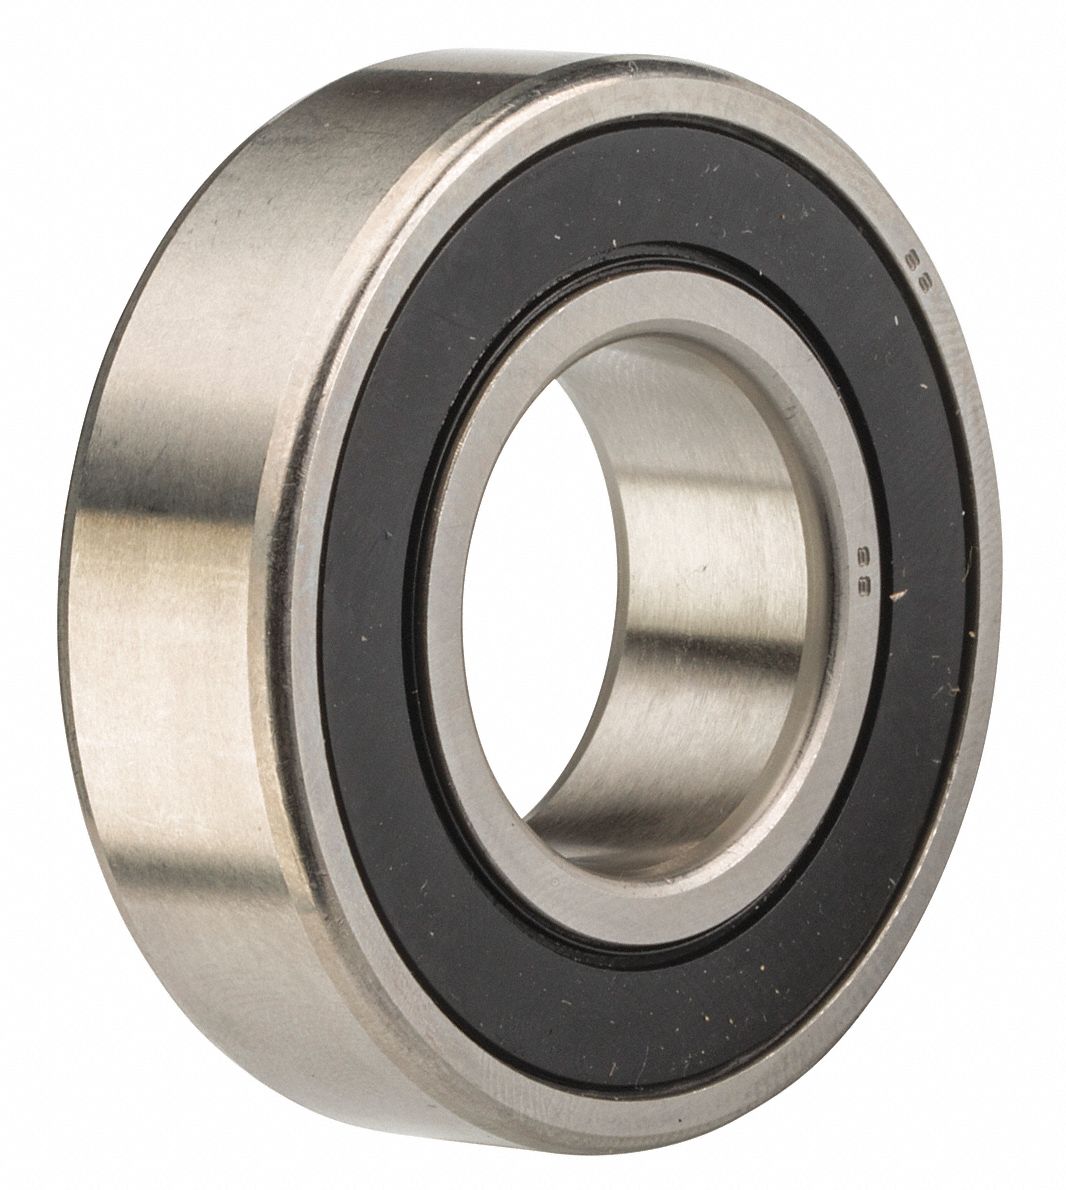 Radial Ball Bearing: 17 mm Bore Dia., 40 mm Outside Dia., 12 mm Wd, Double Sealed